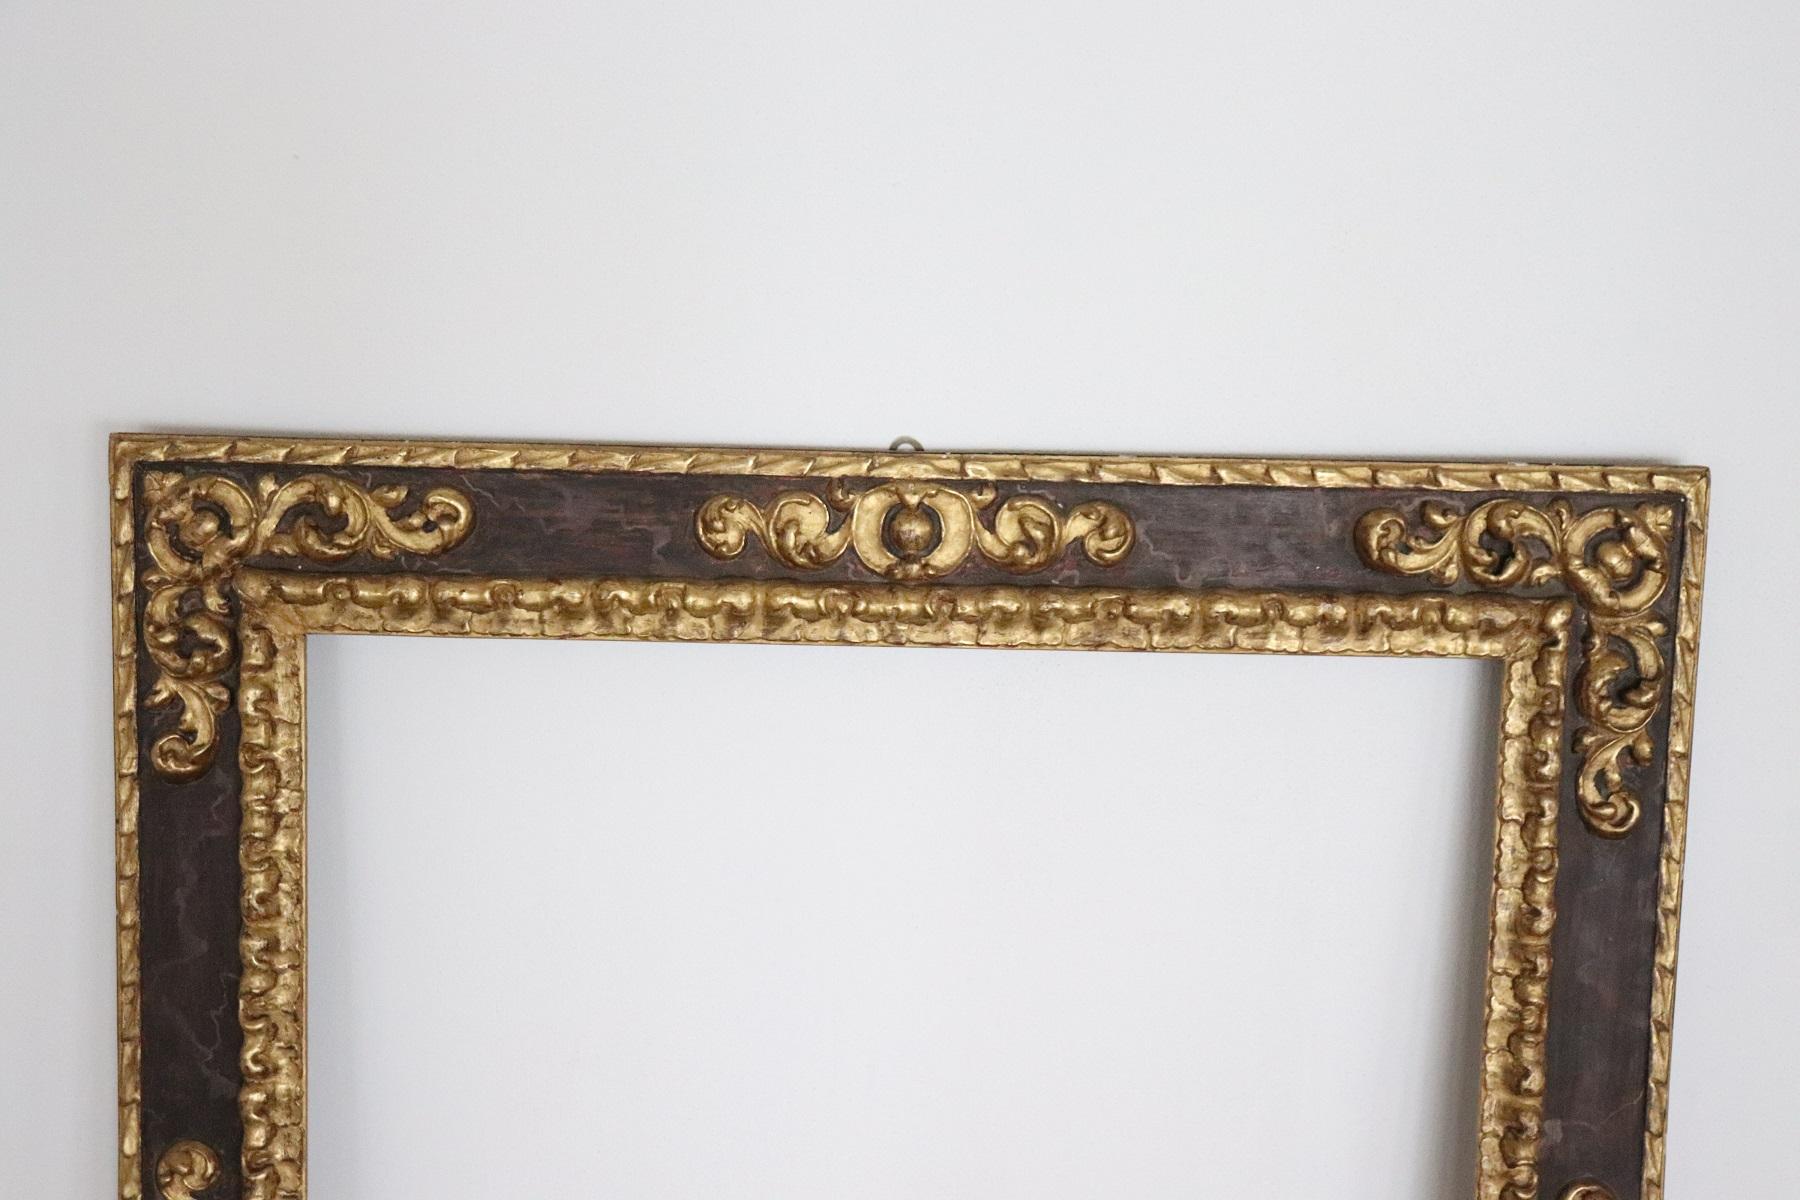 External measures cm 127 x cm 107
inside cm 103.50 x cm 83.50
Refined wood frame circa 1910s in Italian baroque style. Made of solid wood with decoration in golden. Conditions good. You can use this frame according to your imagination with a